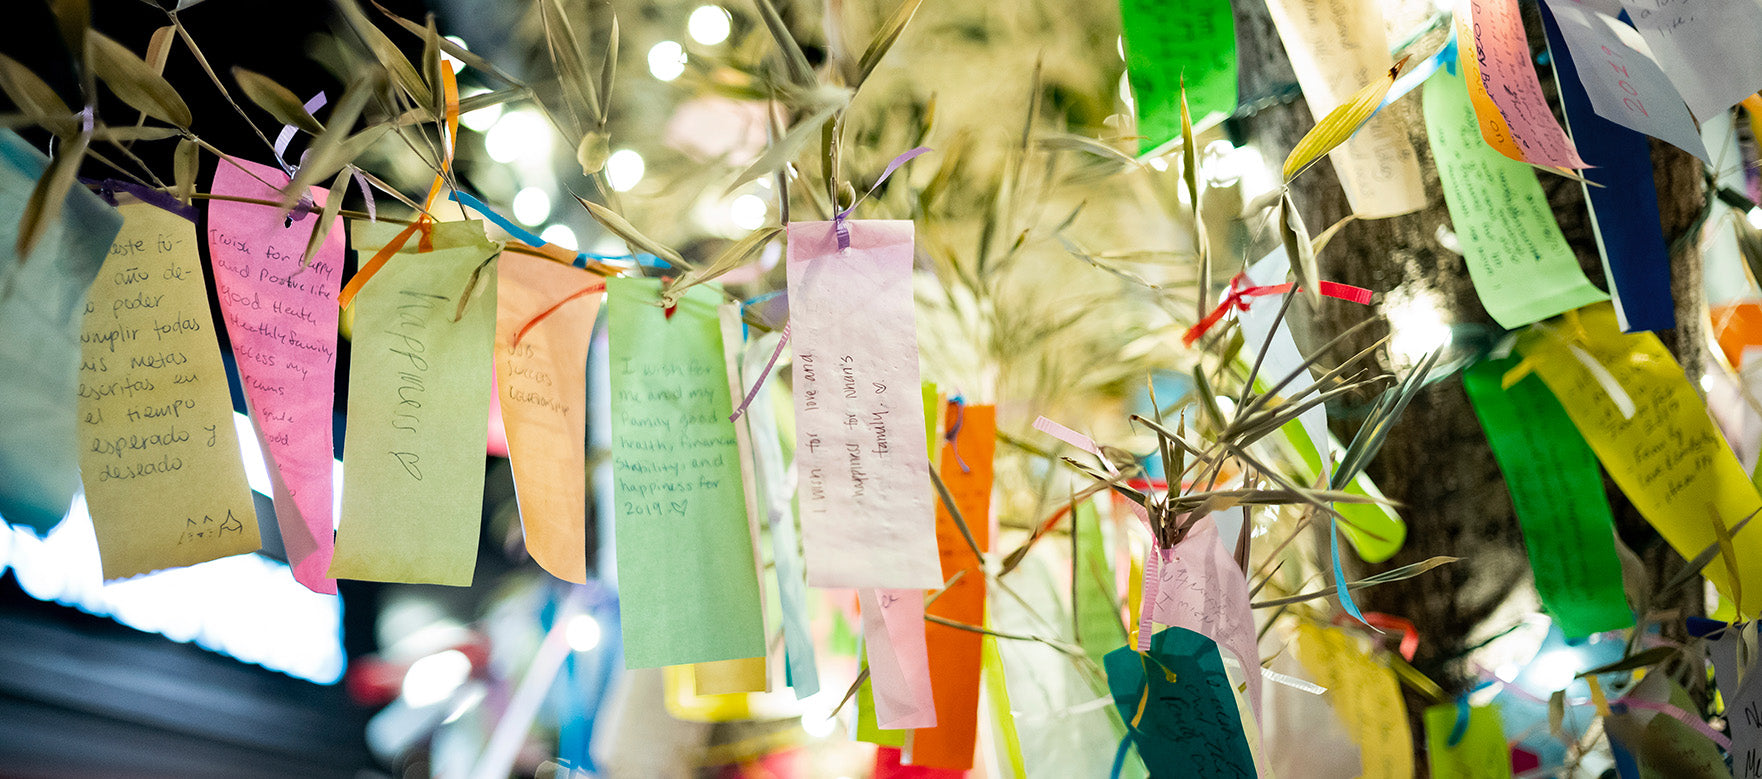 Tanabata: Celebrating our Wishes for a Better World.